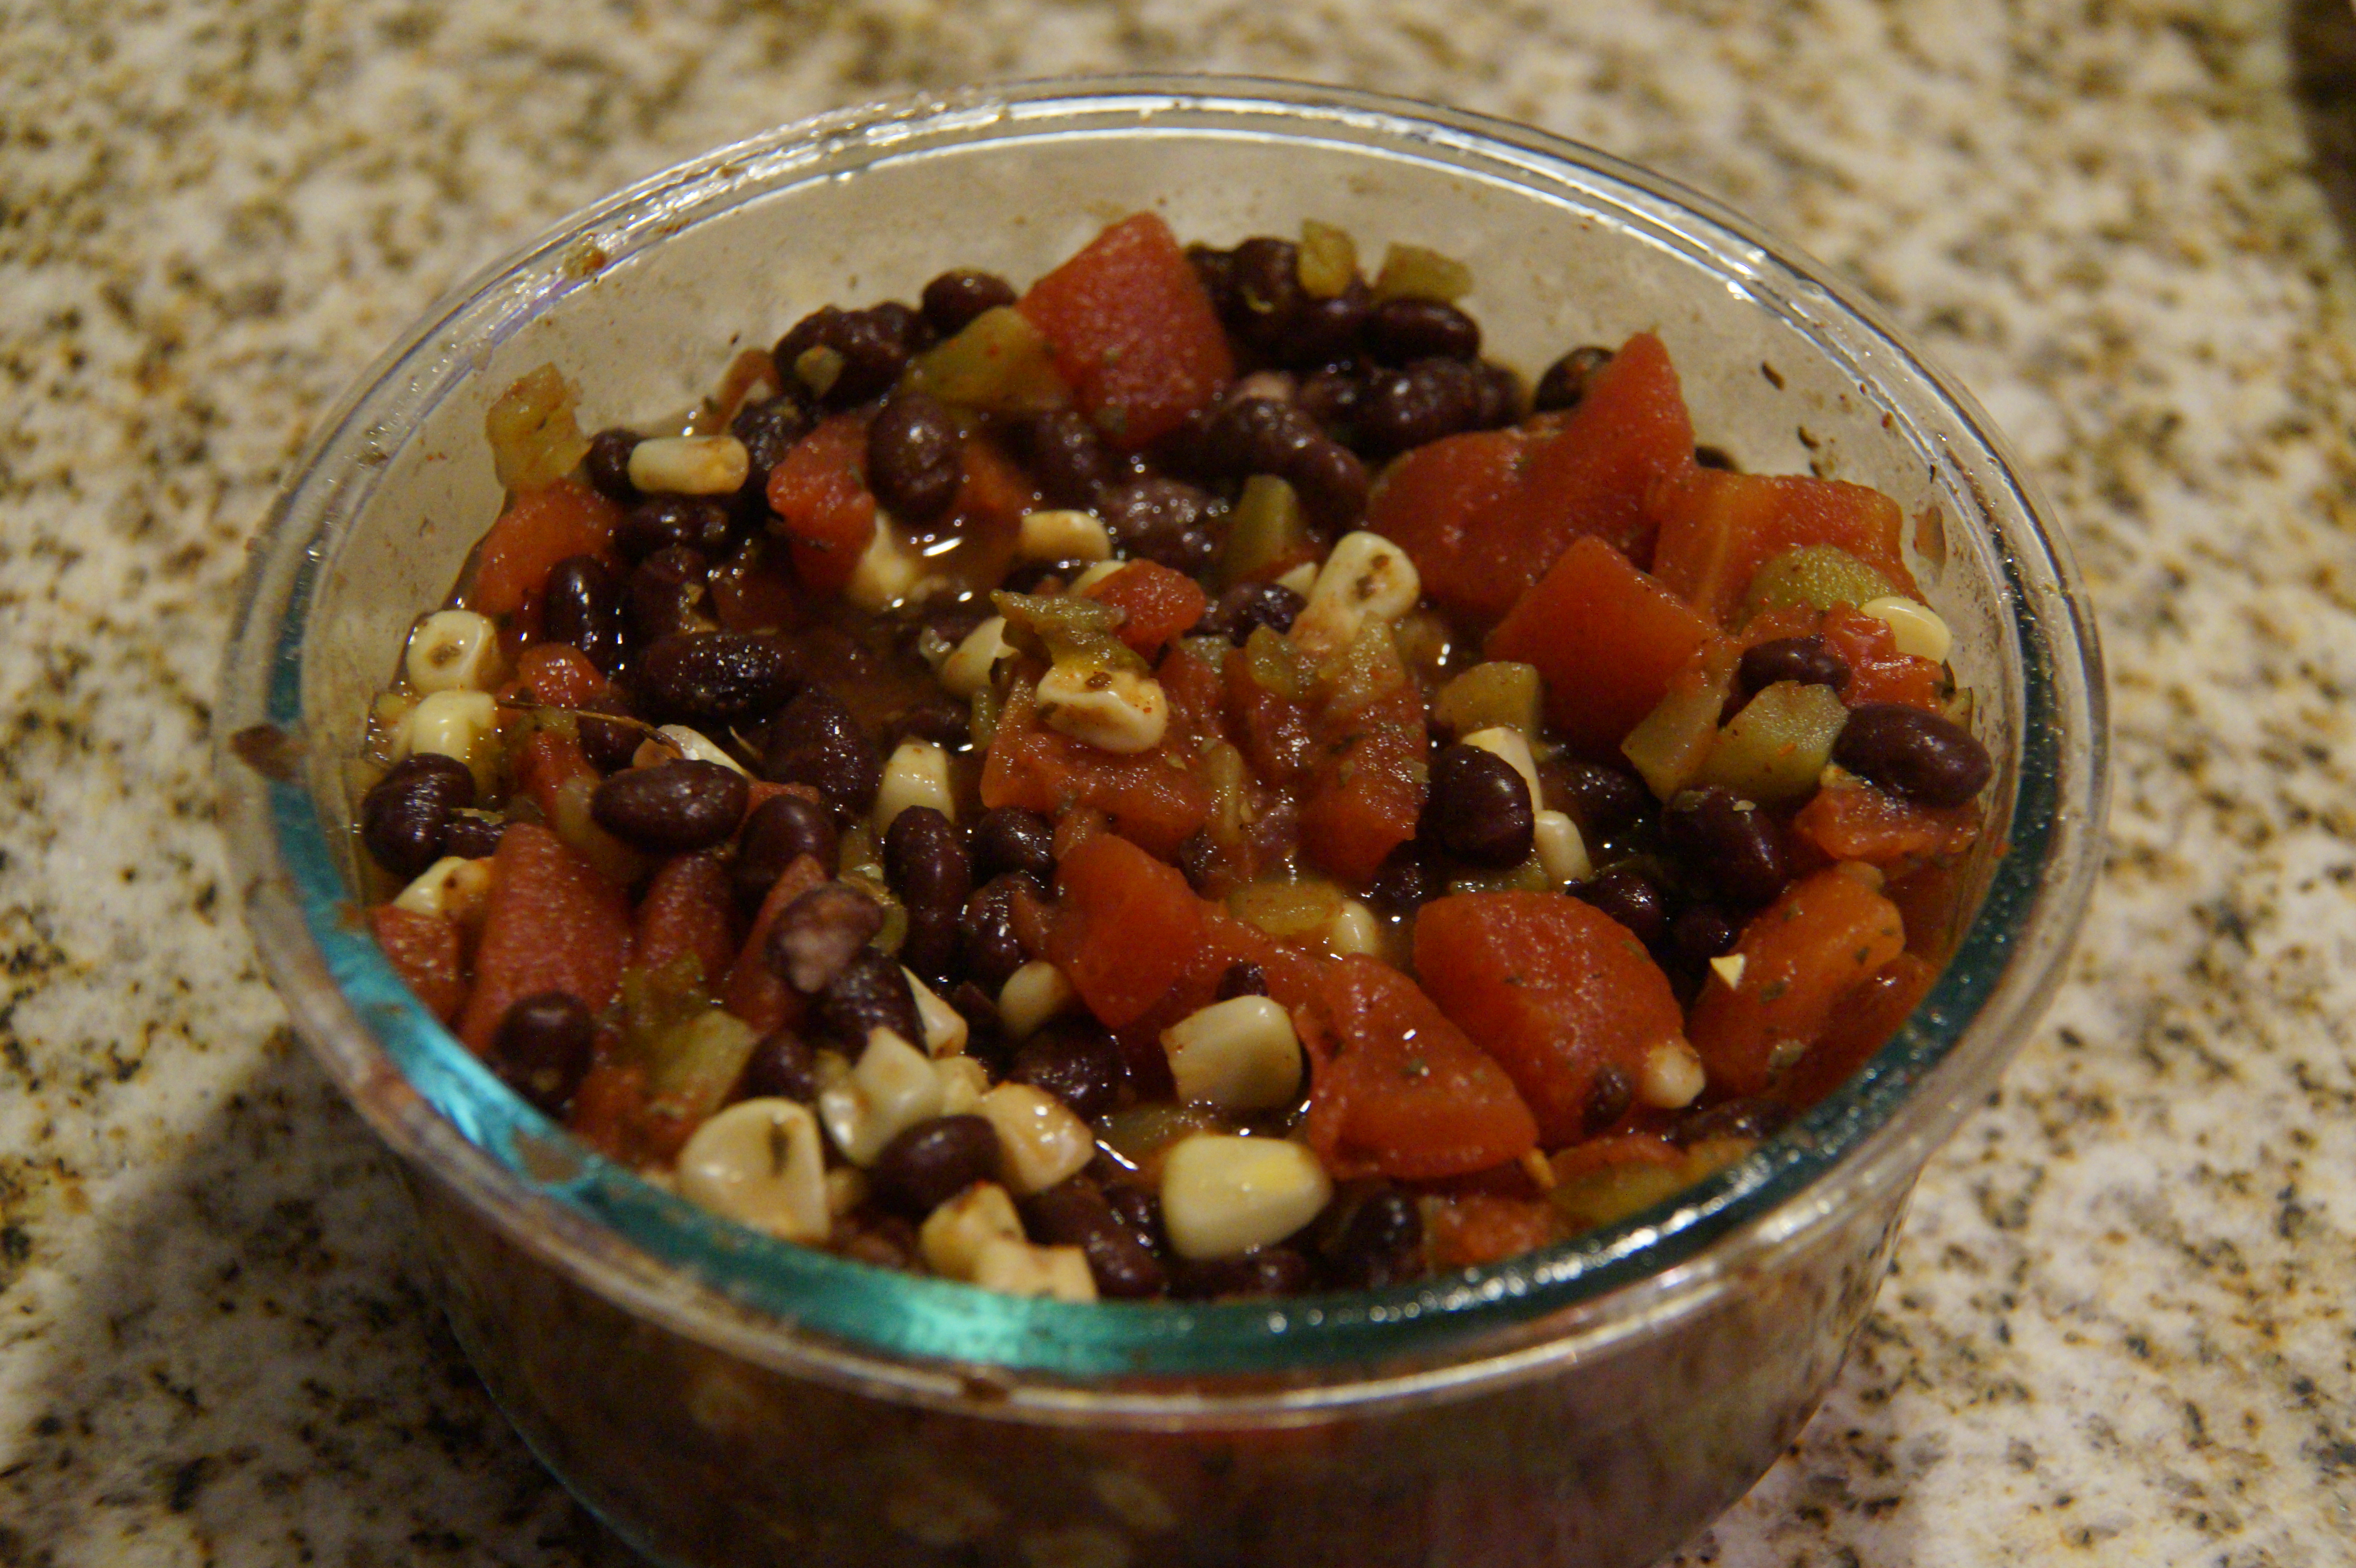 recipe for mexican bean salad